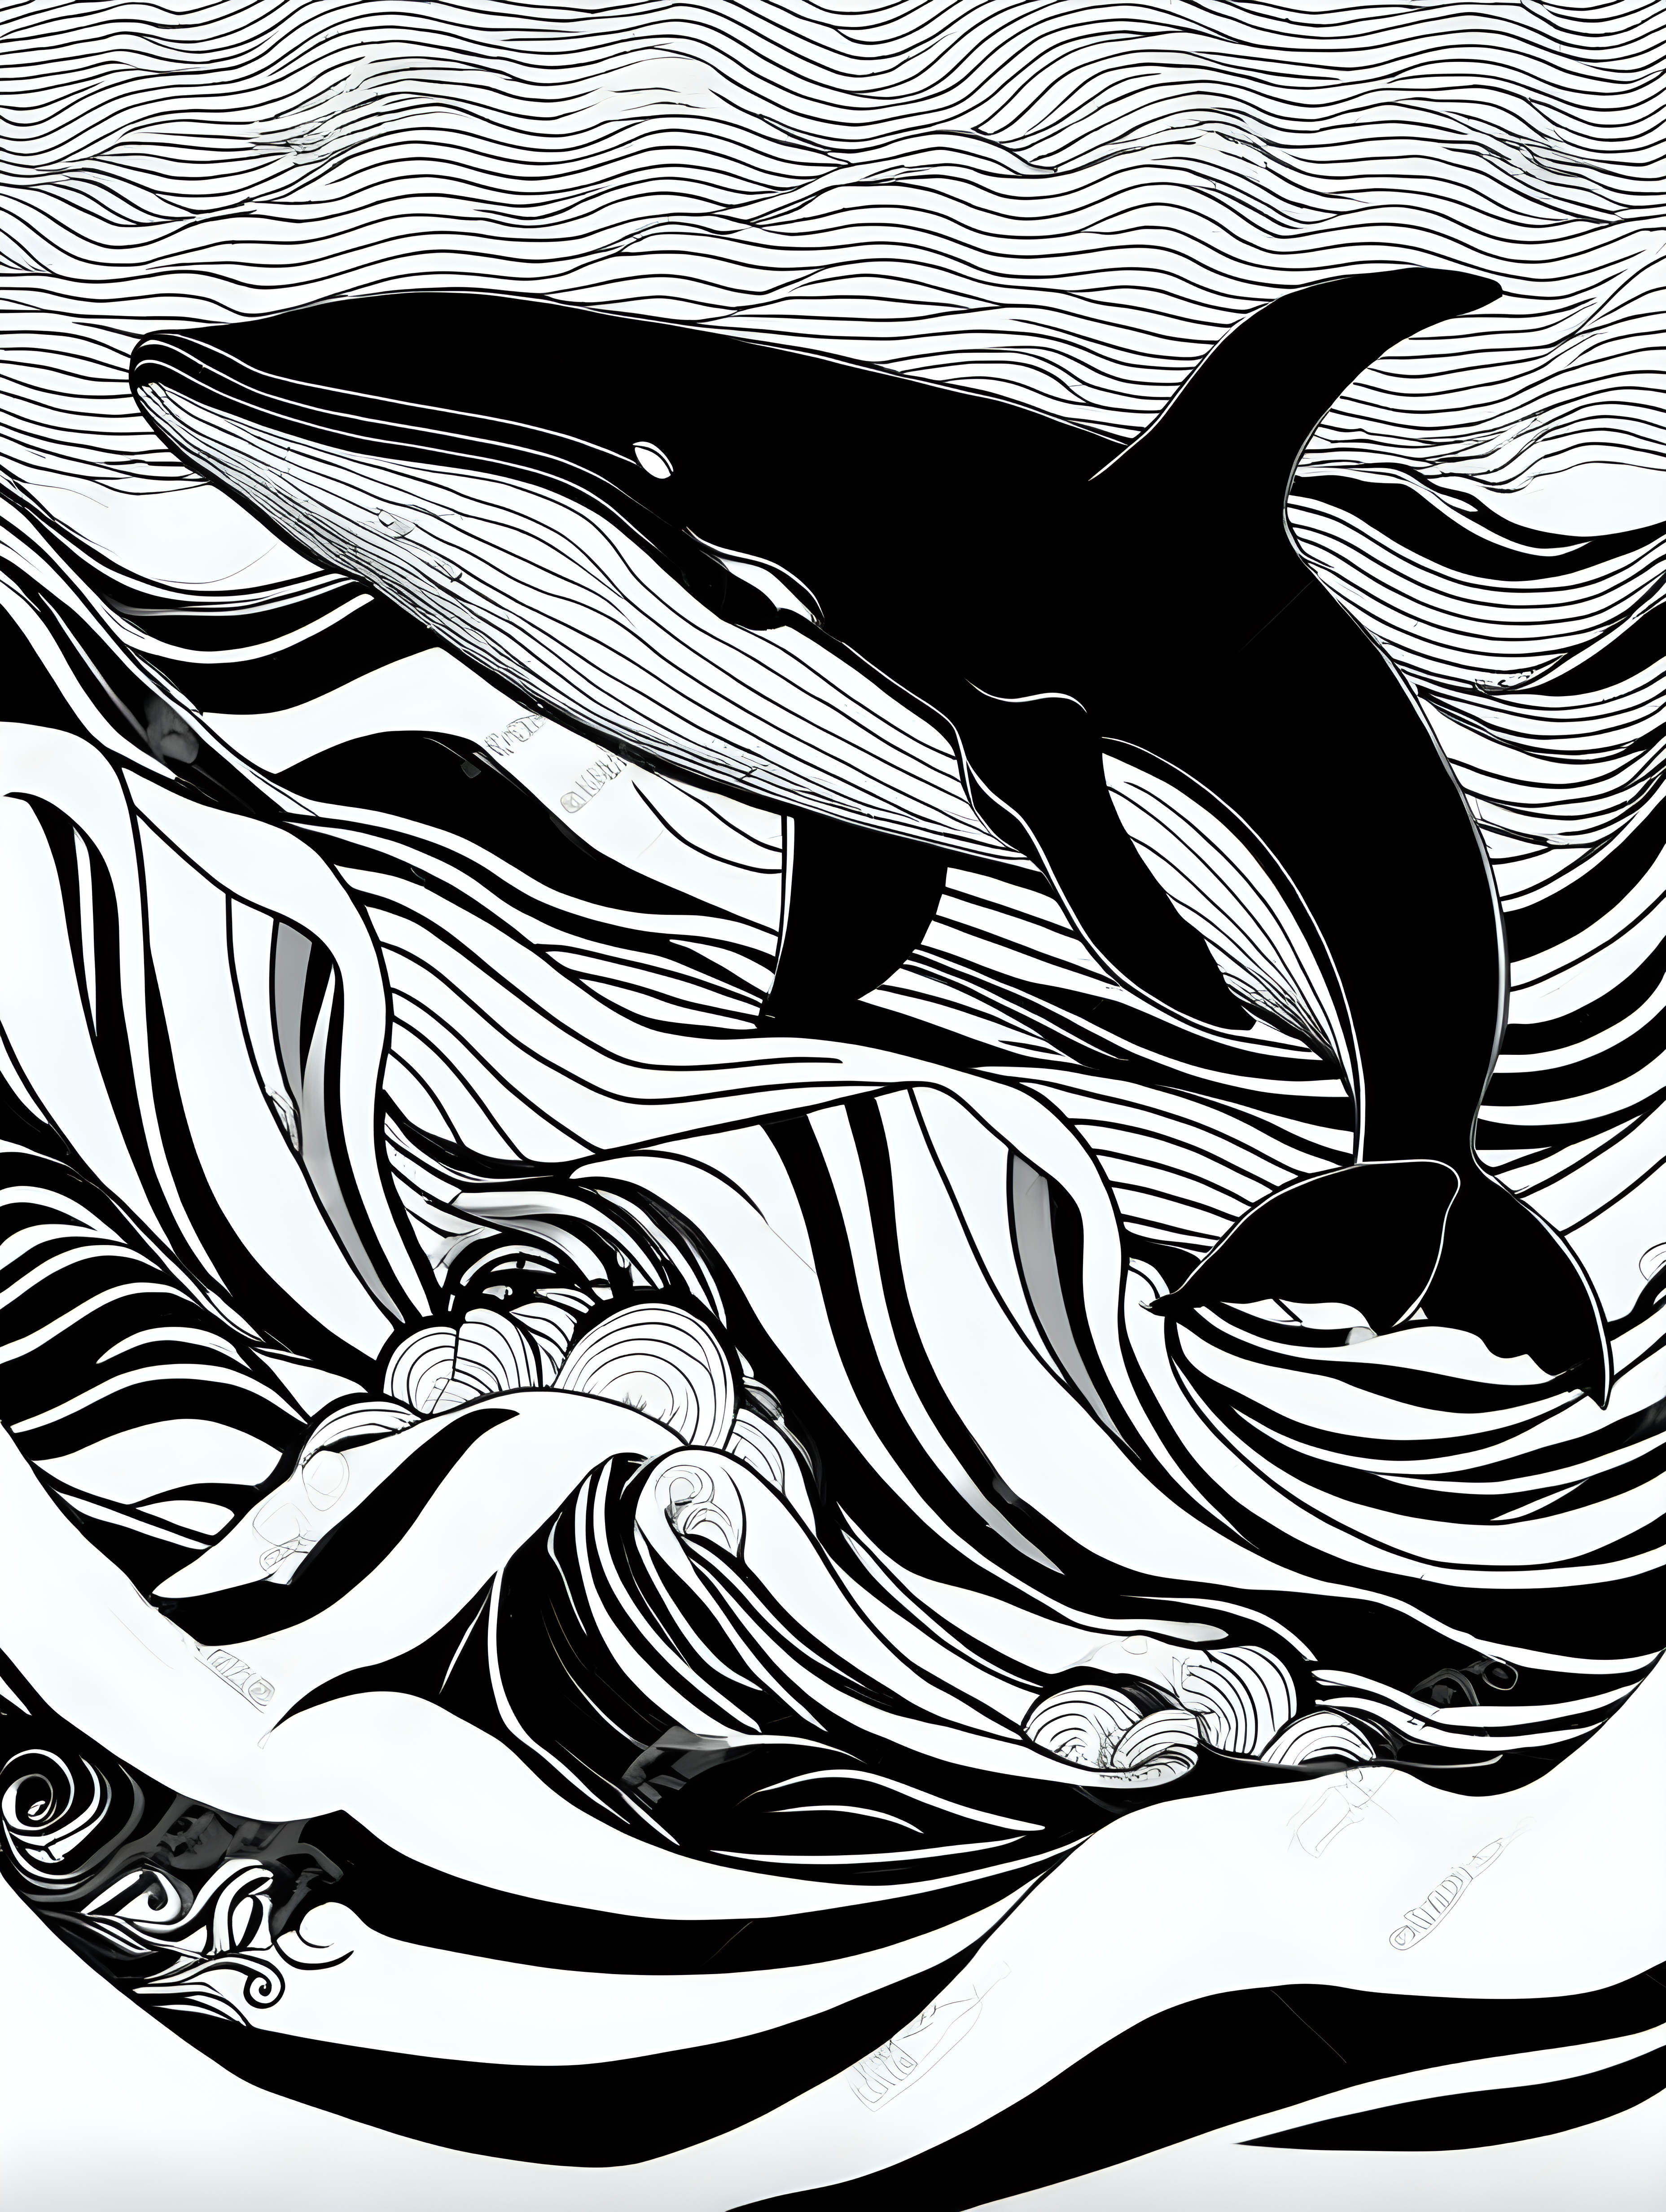 whale in waves full abstract background, simple draw, no colors